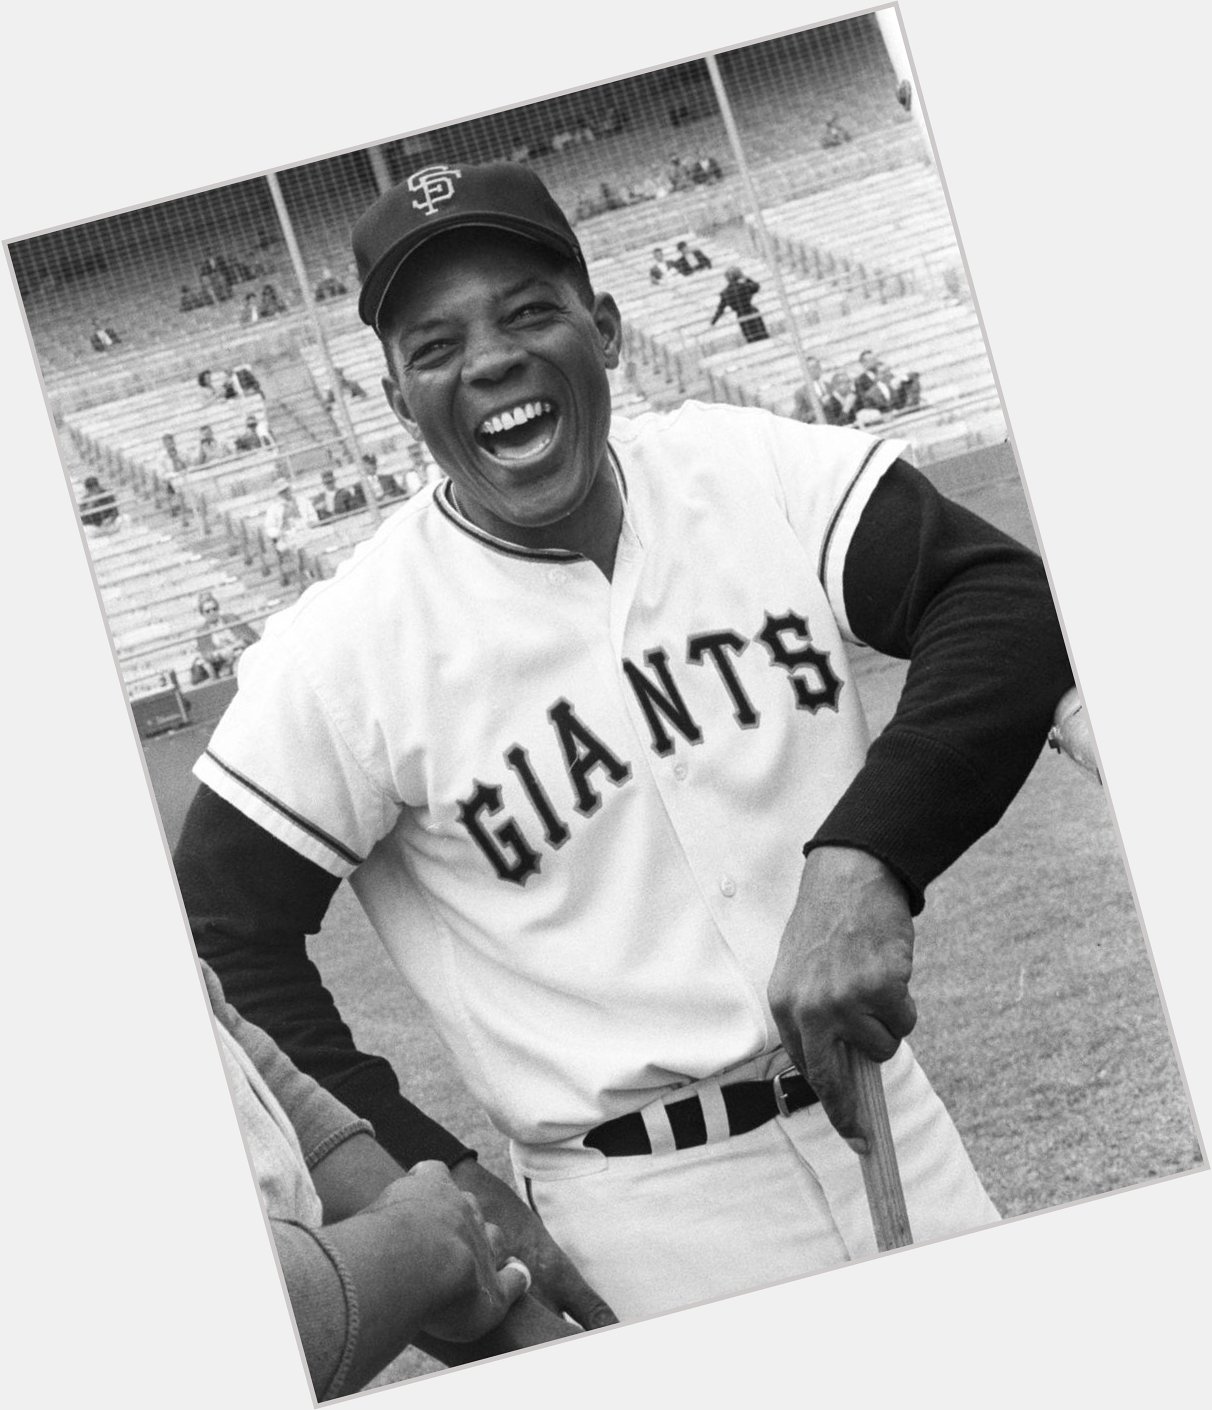 Happy Willie Mays Birthday everyone. The greatest ever is 84 today!
A Hall of Famer on and off the field. 